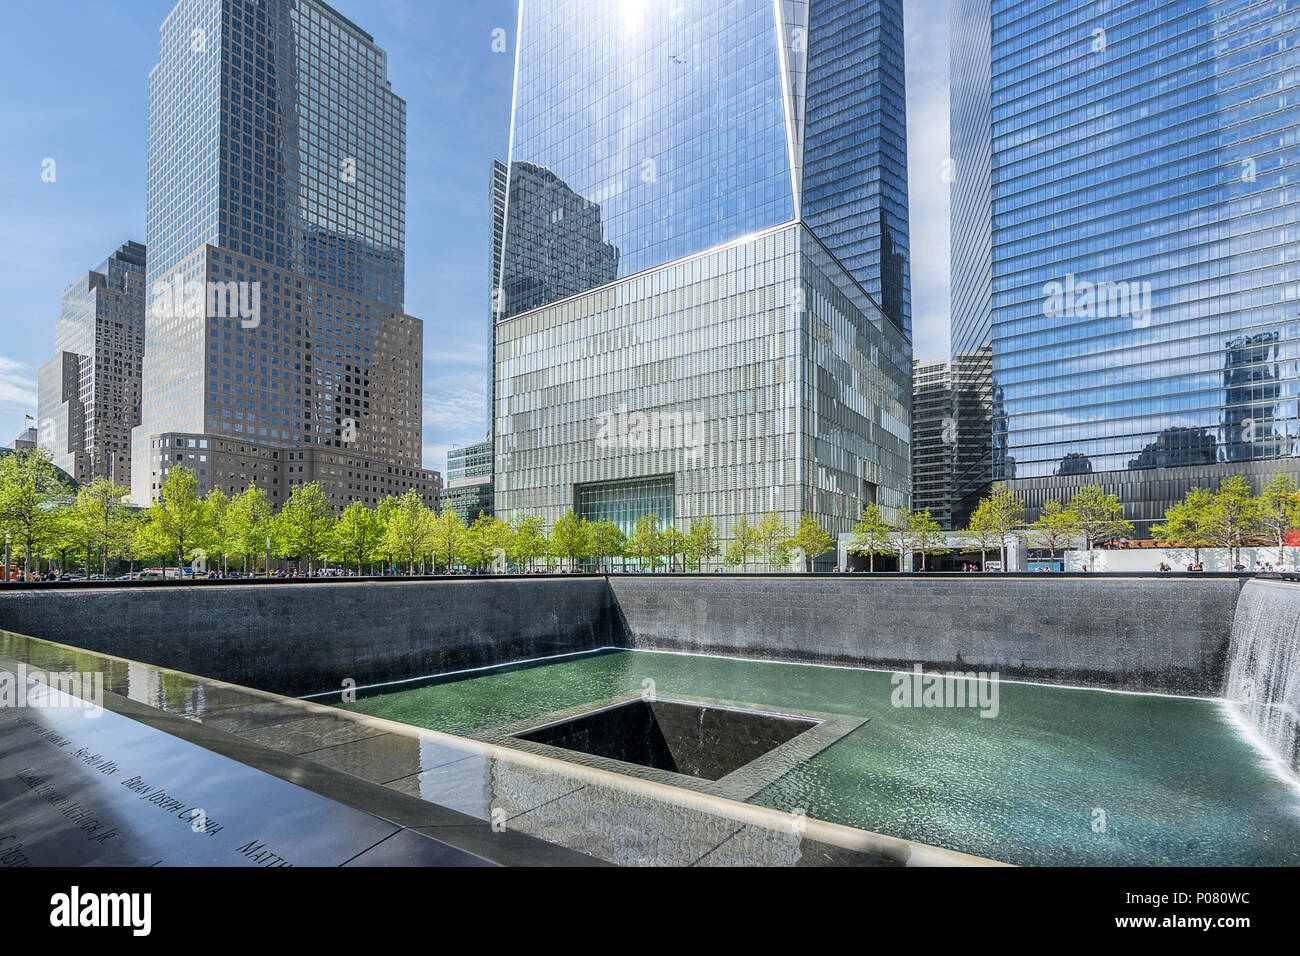 The reflecting pool at the world trade centre in New York city Stock Photo